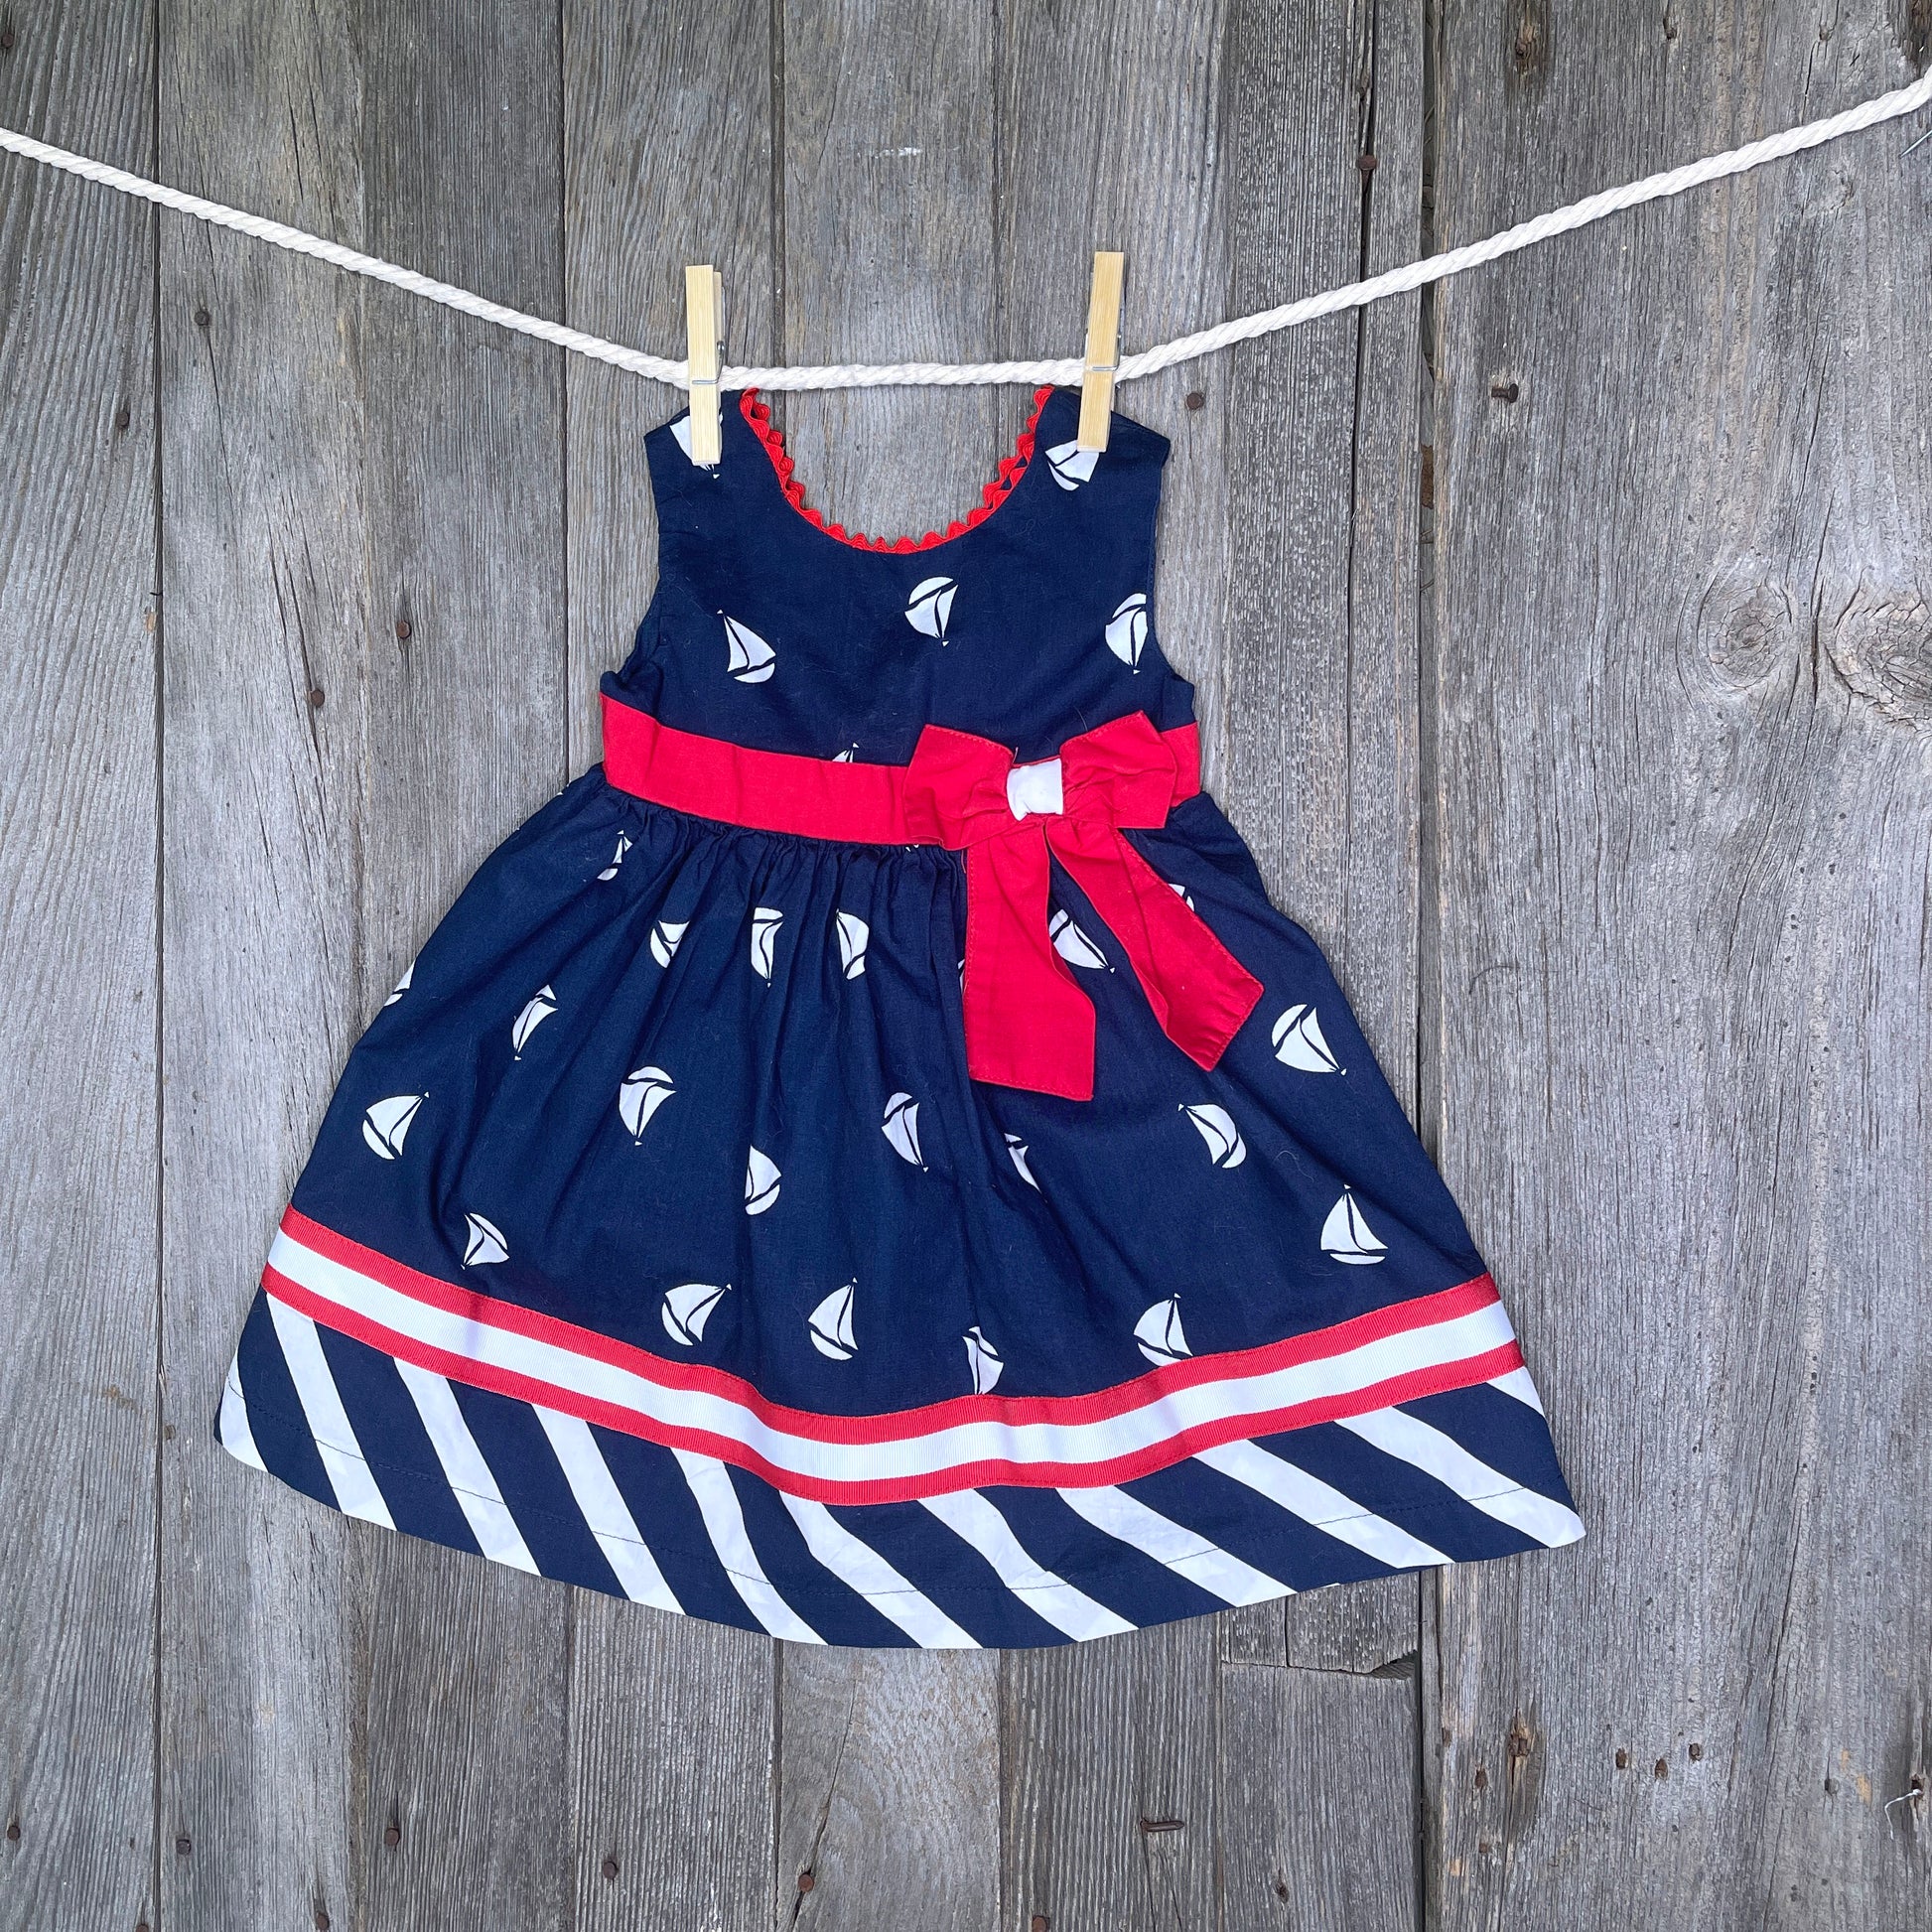 One Piece Outfit Dress 12-18 Months  BCP (7202326741170)